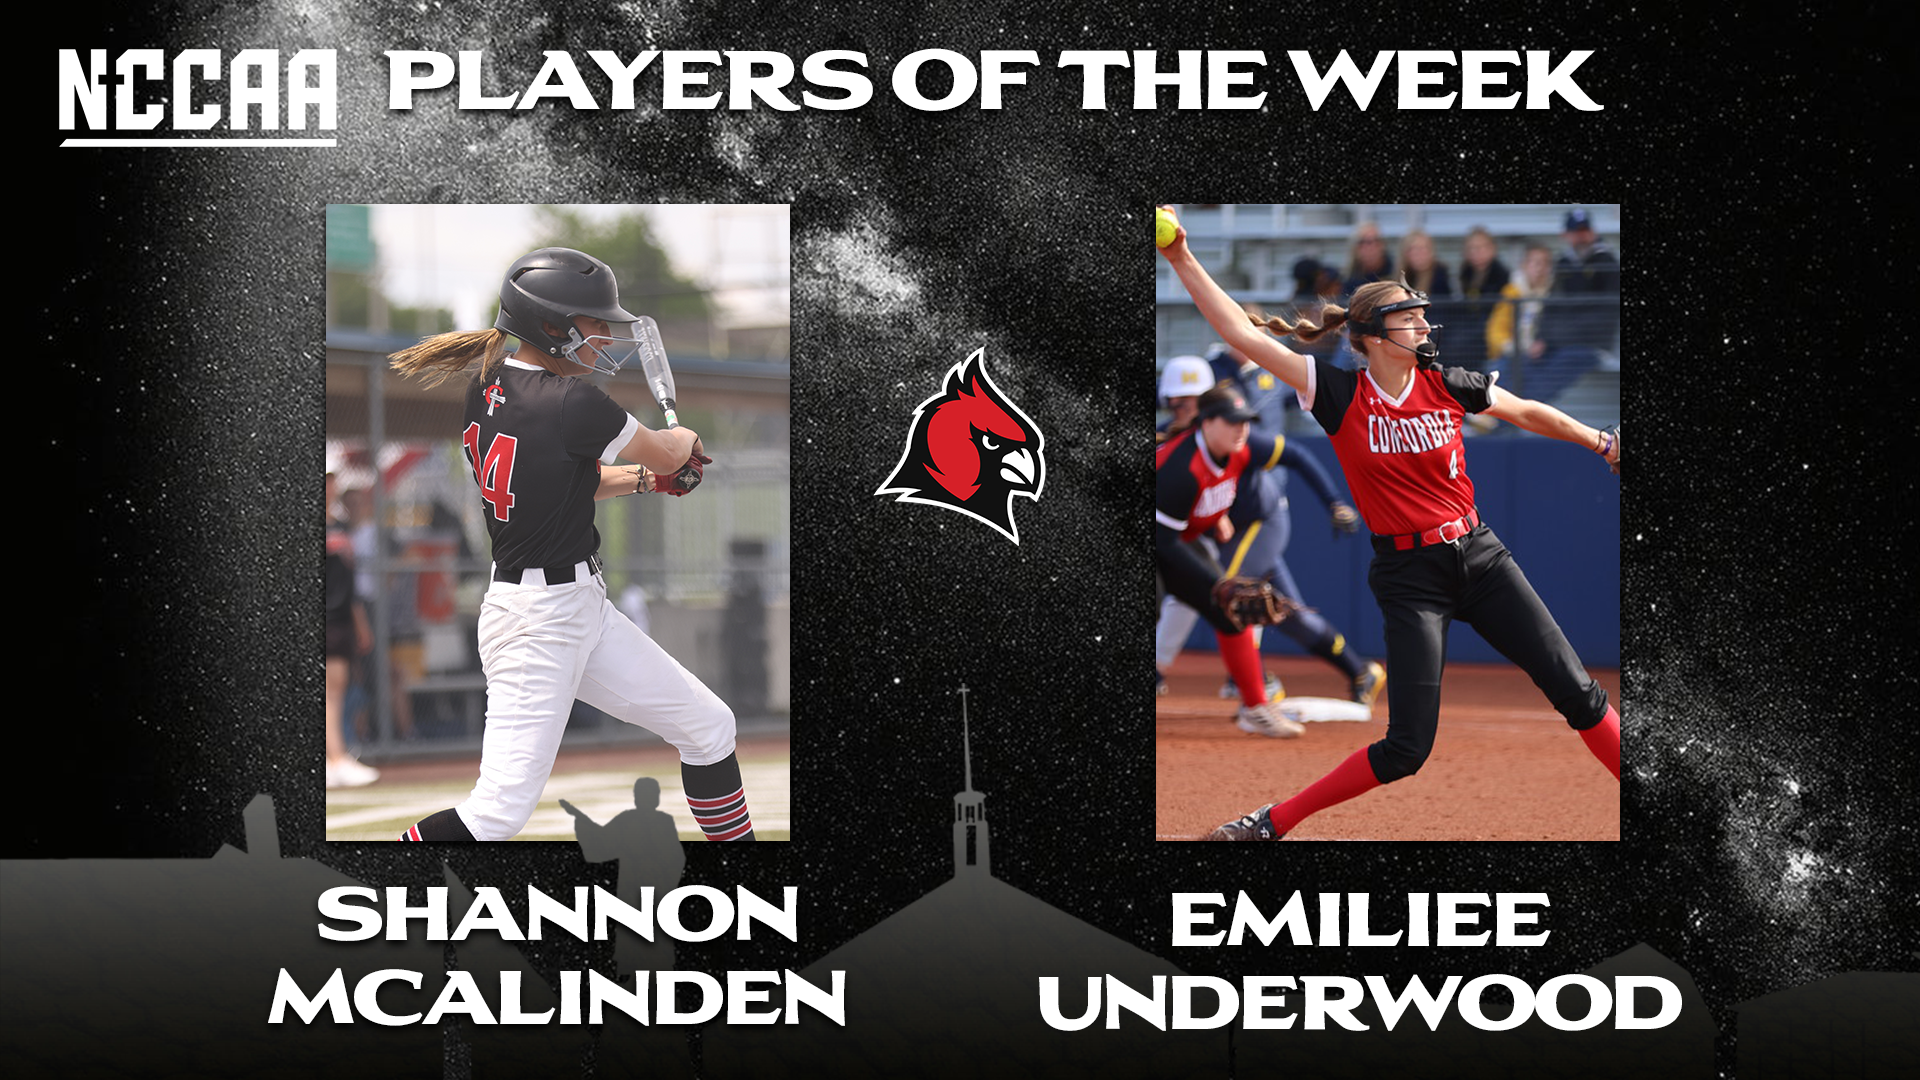 Softball sweeps NCCAA Student-Athlete of the Week awards as McAlinden and Underwood are both honored.